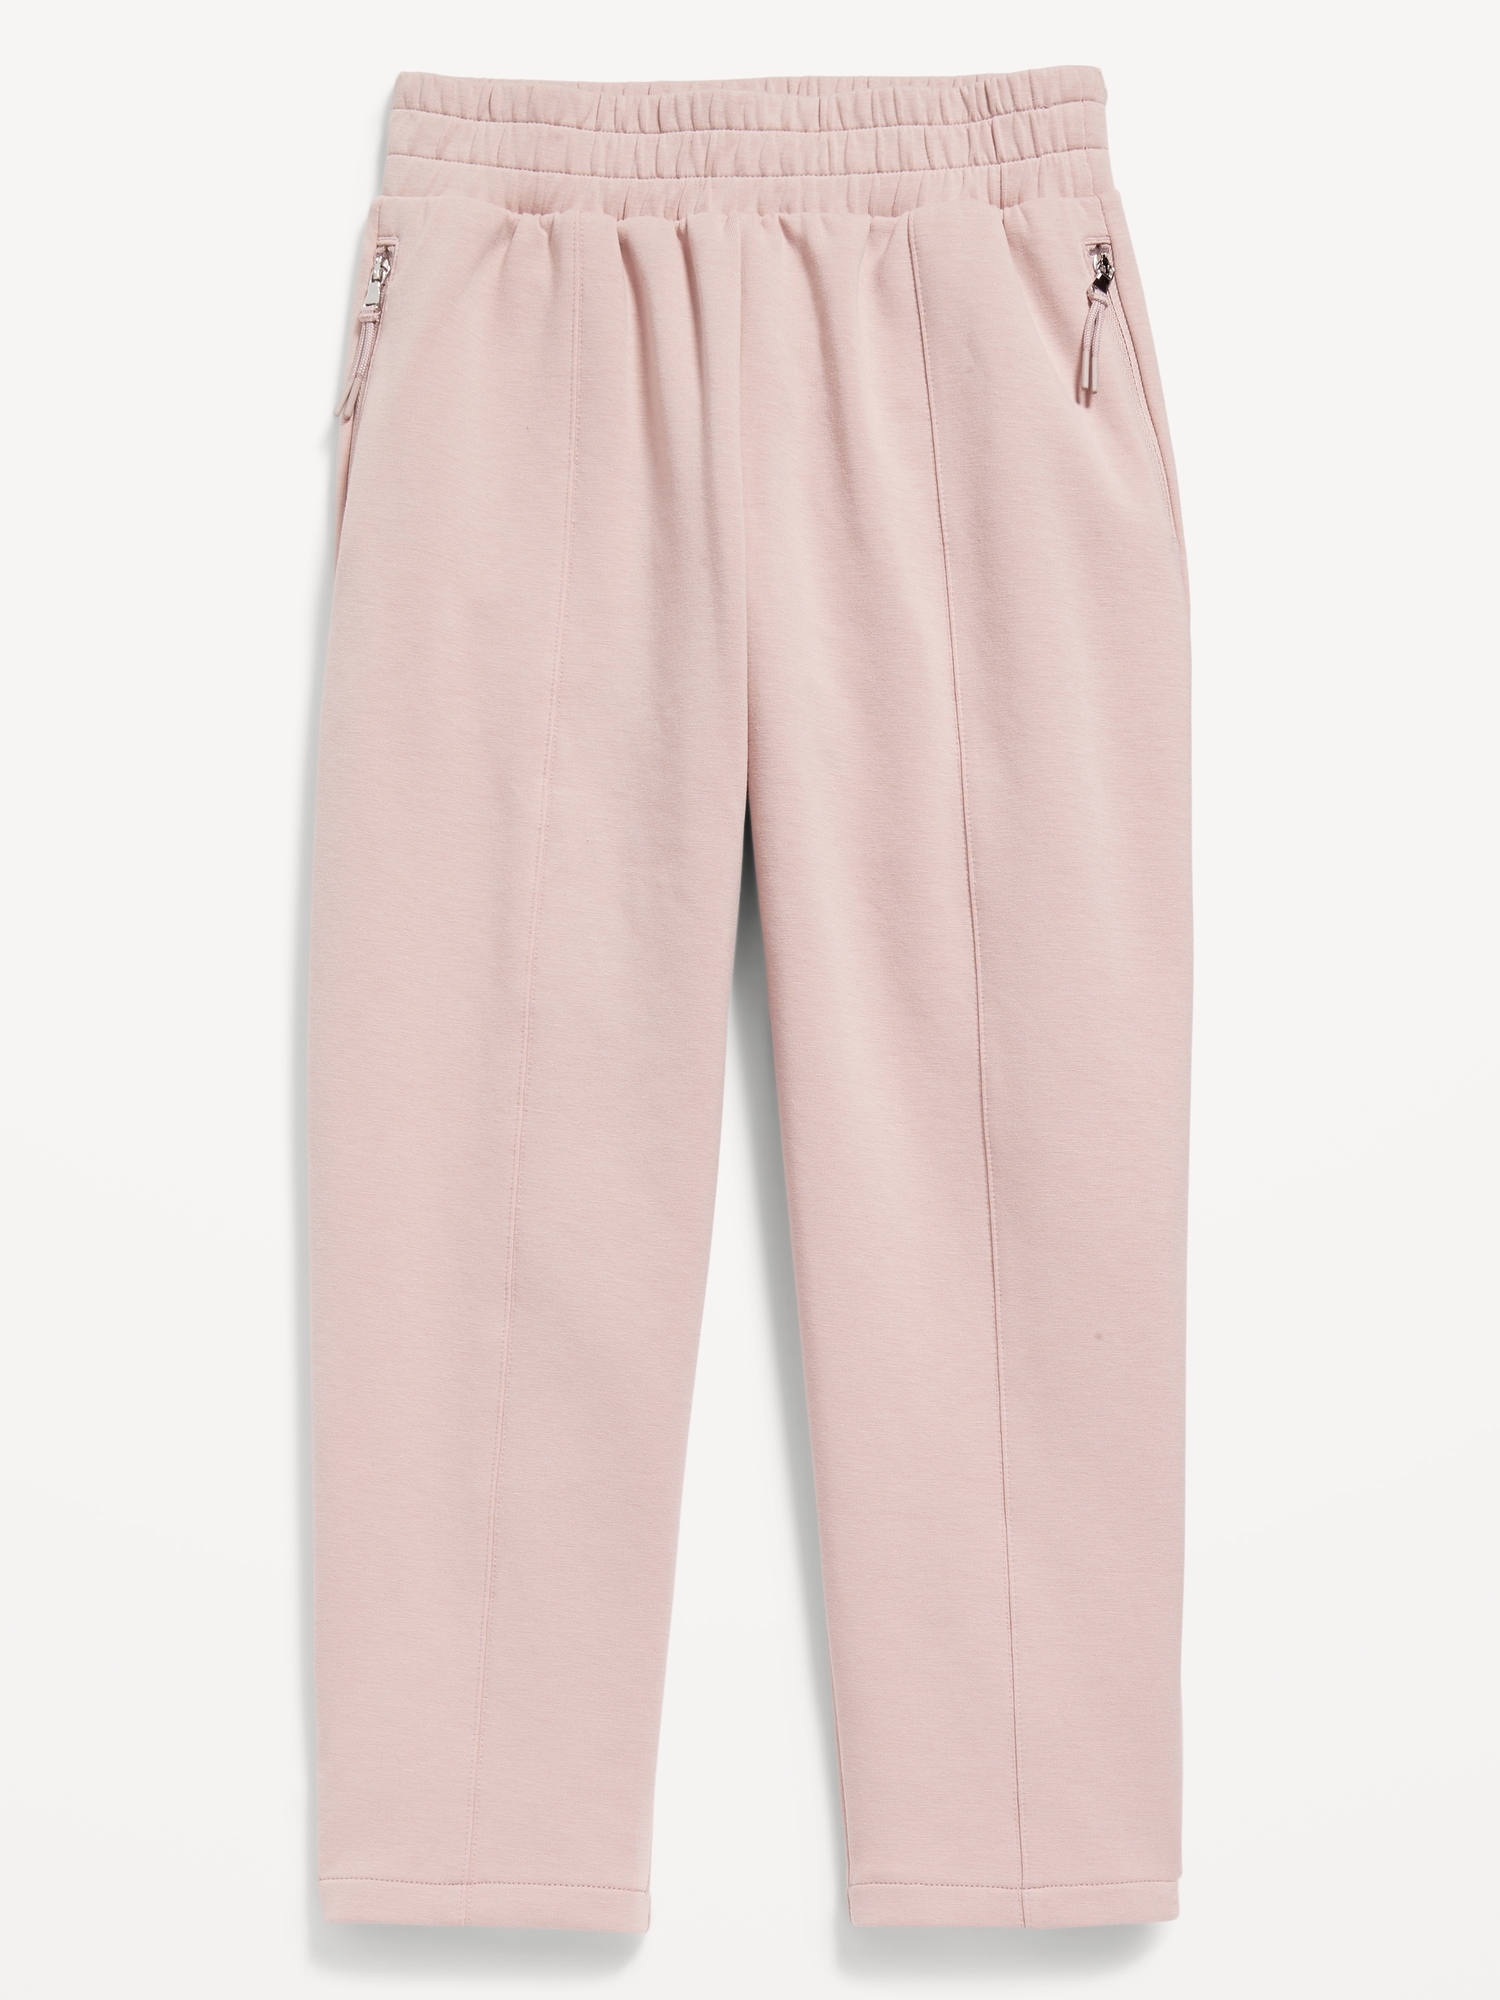 High-Waisted Dynamic Fleece Joggers for Women, Old Navy